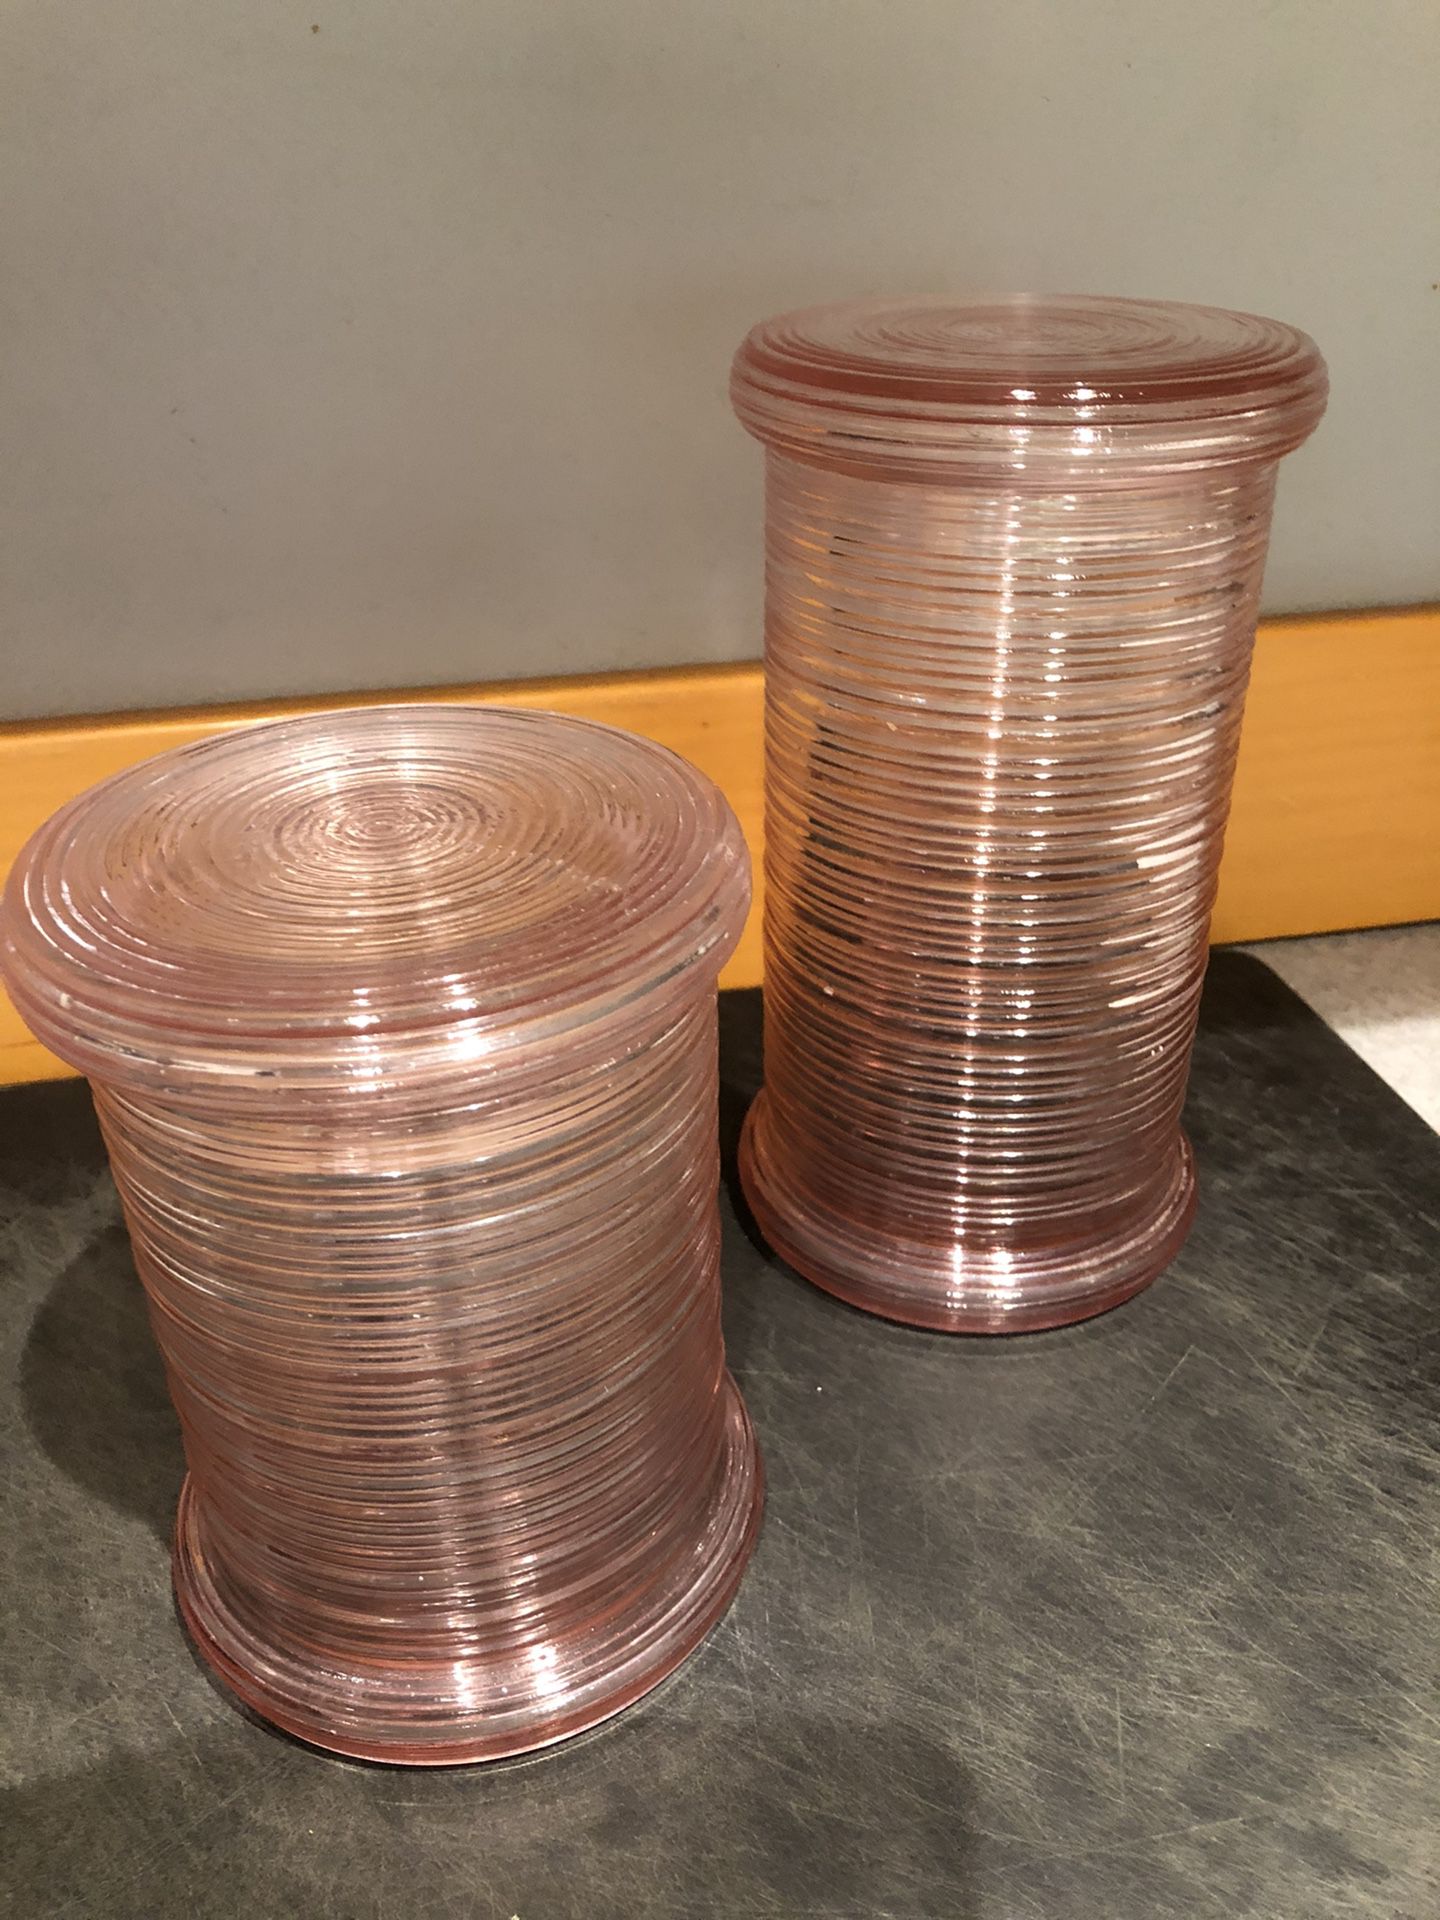 Vintage pink glass canisters